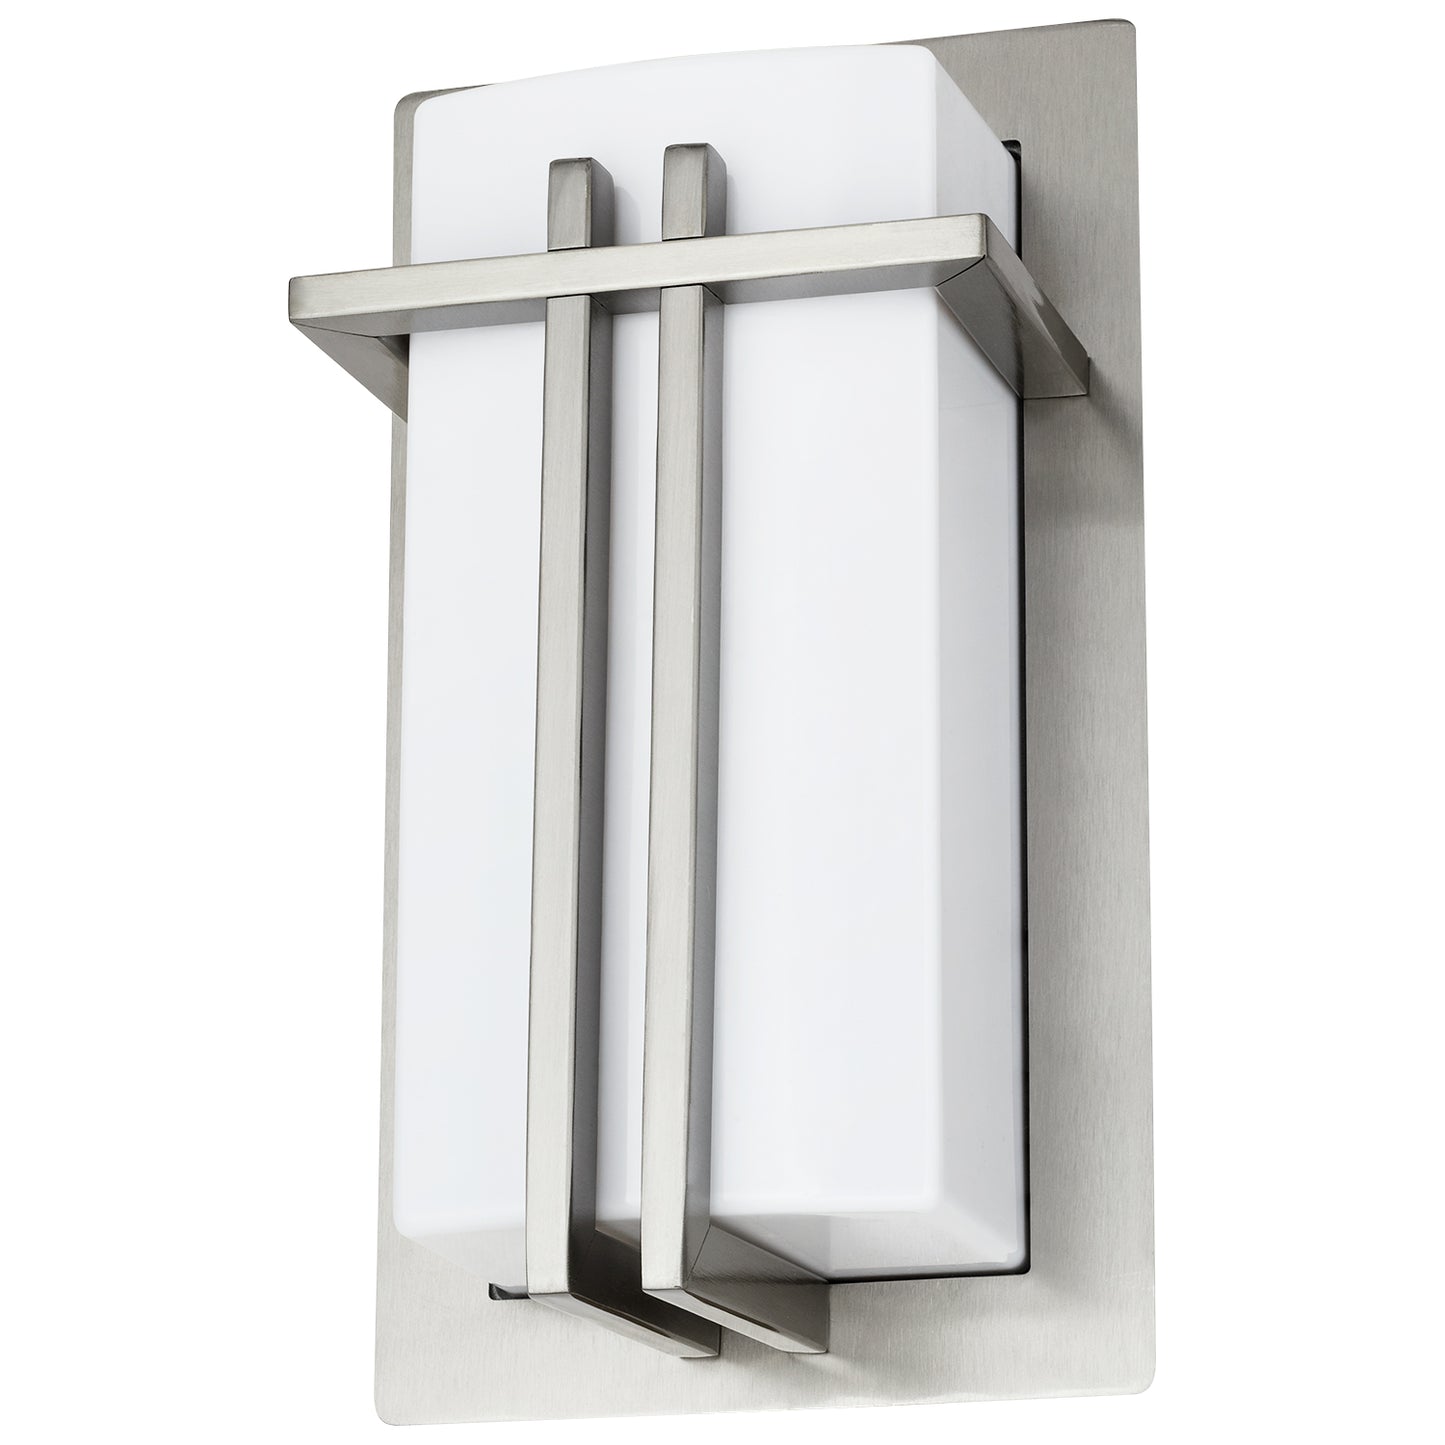 Sunlite - Decorative Square Wall Sconce Light Fixture, Opal Shade, Stainless Steel Frame